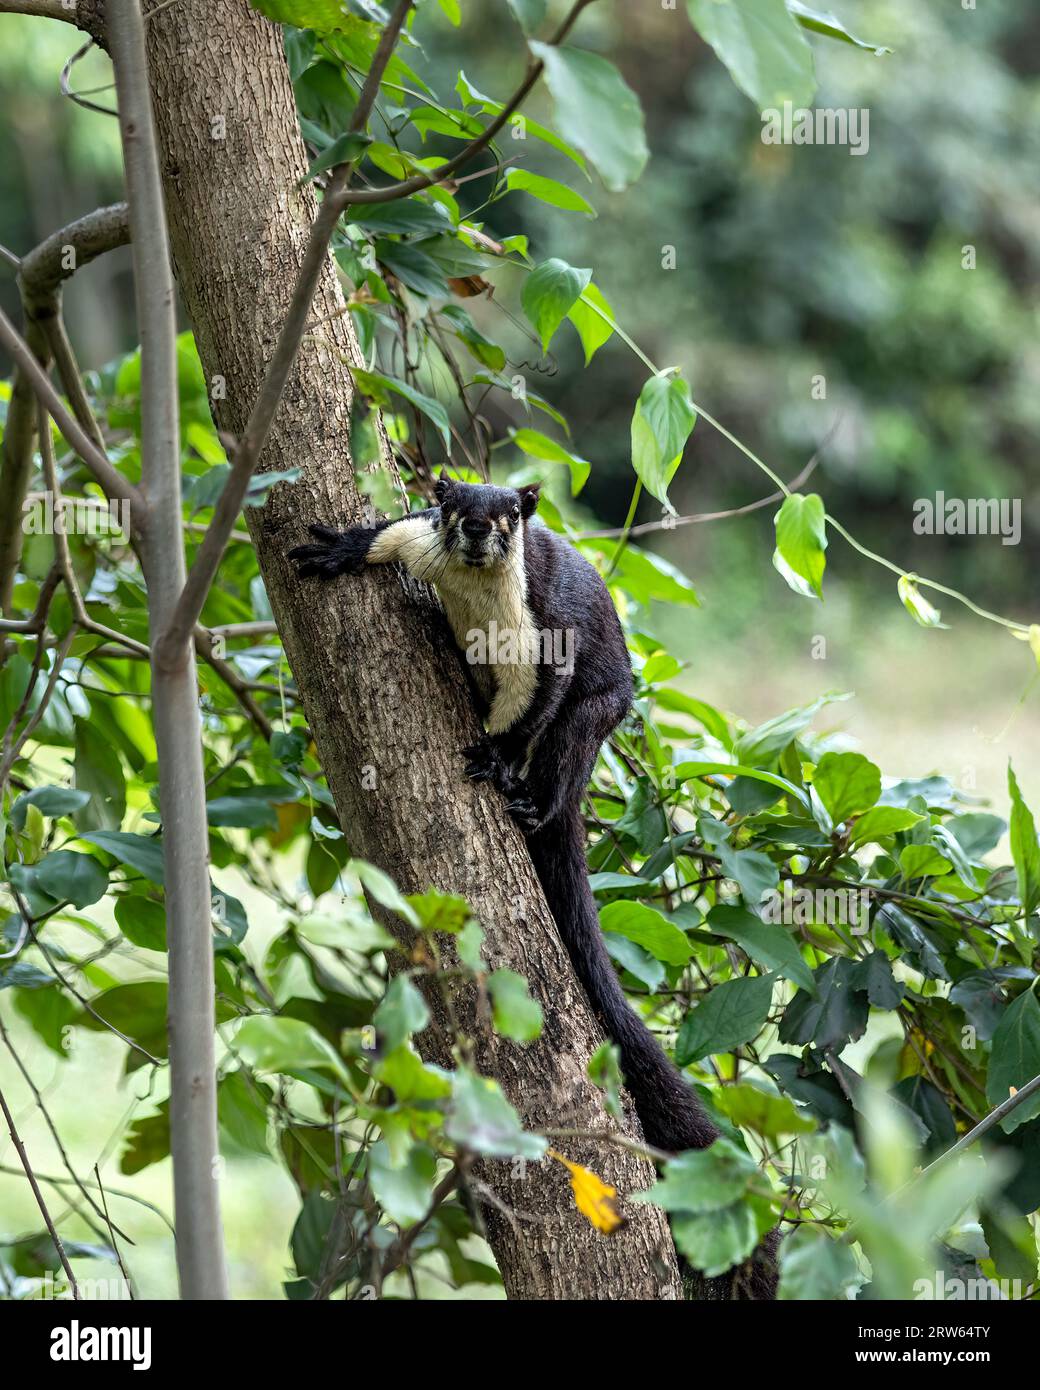 Malayan Giant Squirrel perched on a tree trunk inquisitively staring at the camera Stock Photo